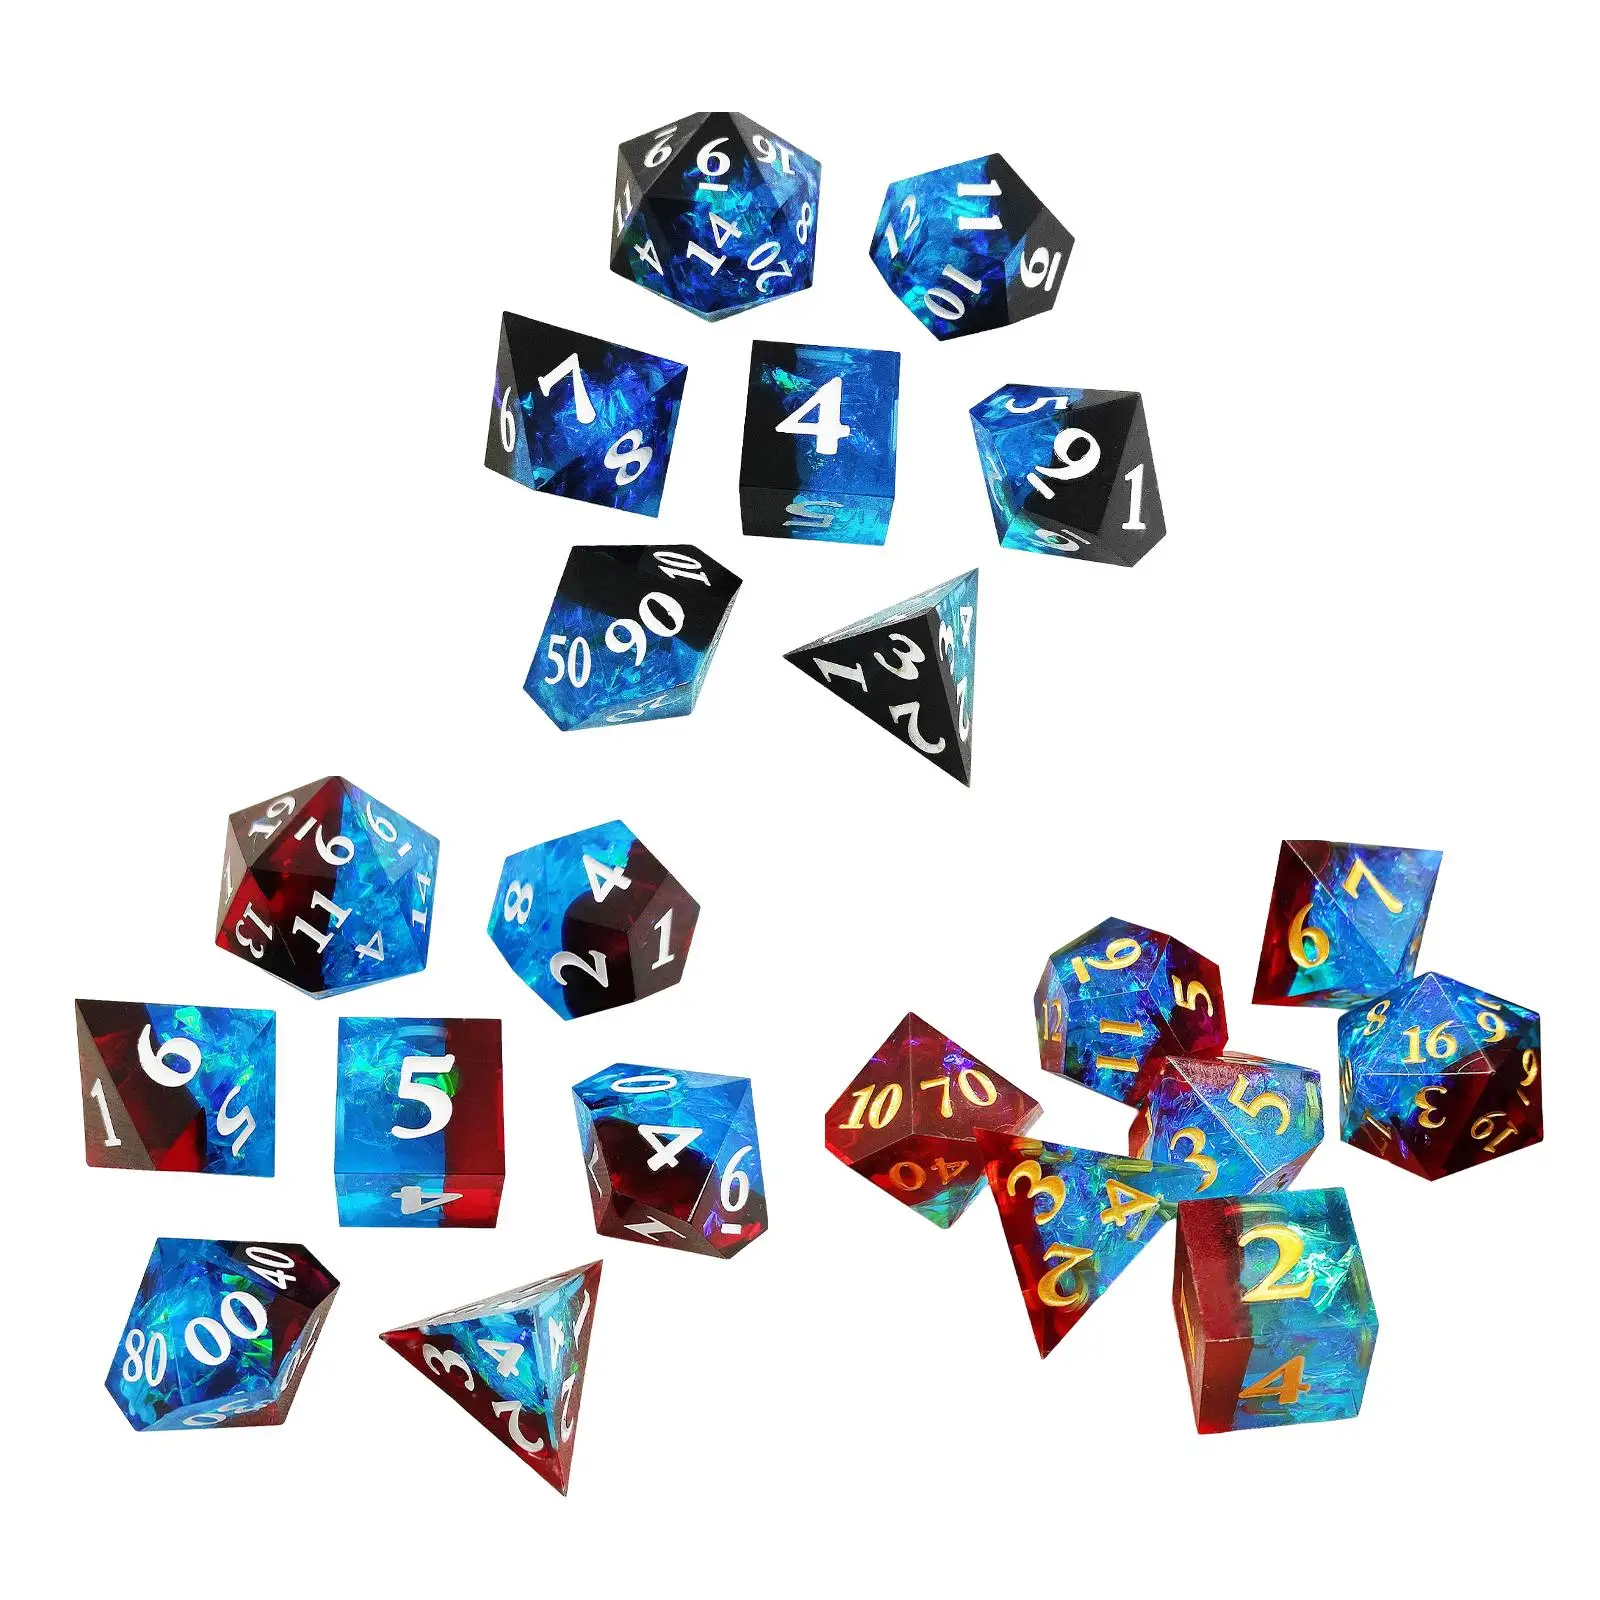 7x Polyhedral Dice D4 D6 D8 D10 D12 D20 Play Entertainment Toys Table Game for Role Playing Game Party Bar Family Gathering Cafe